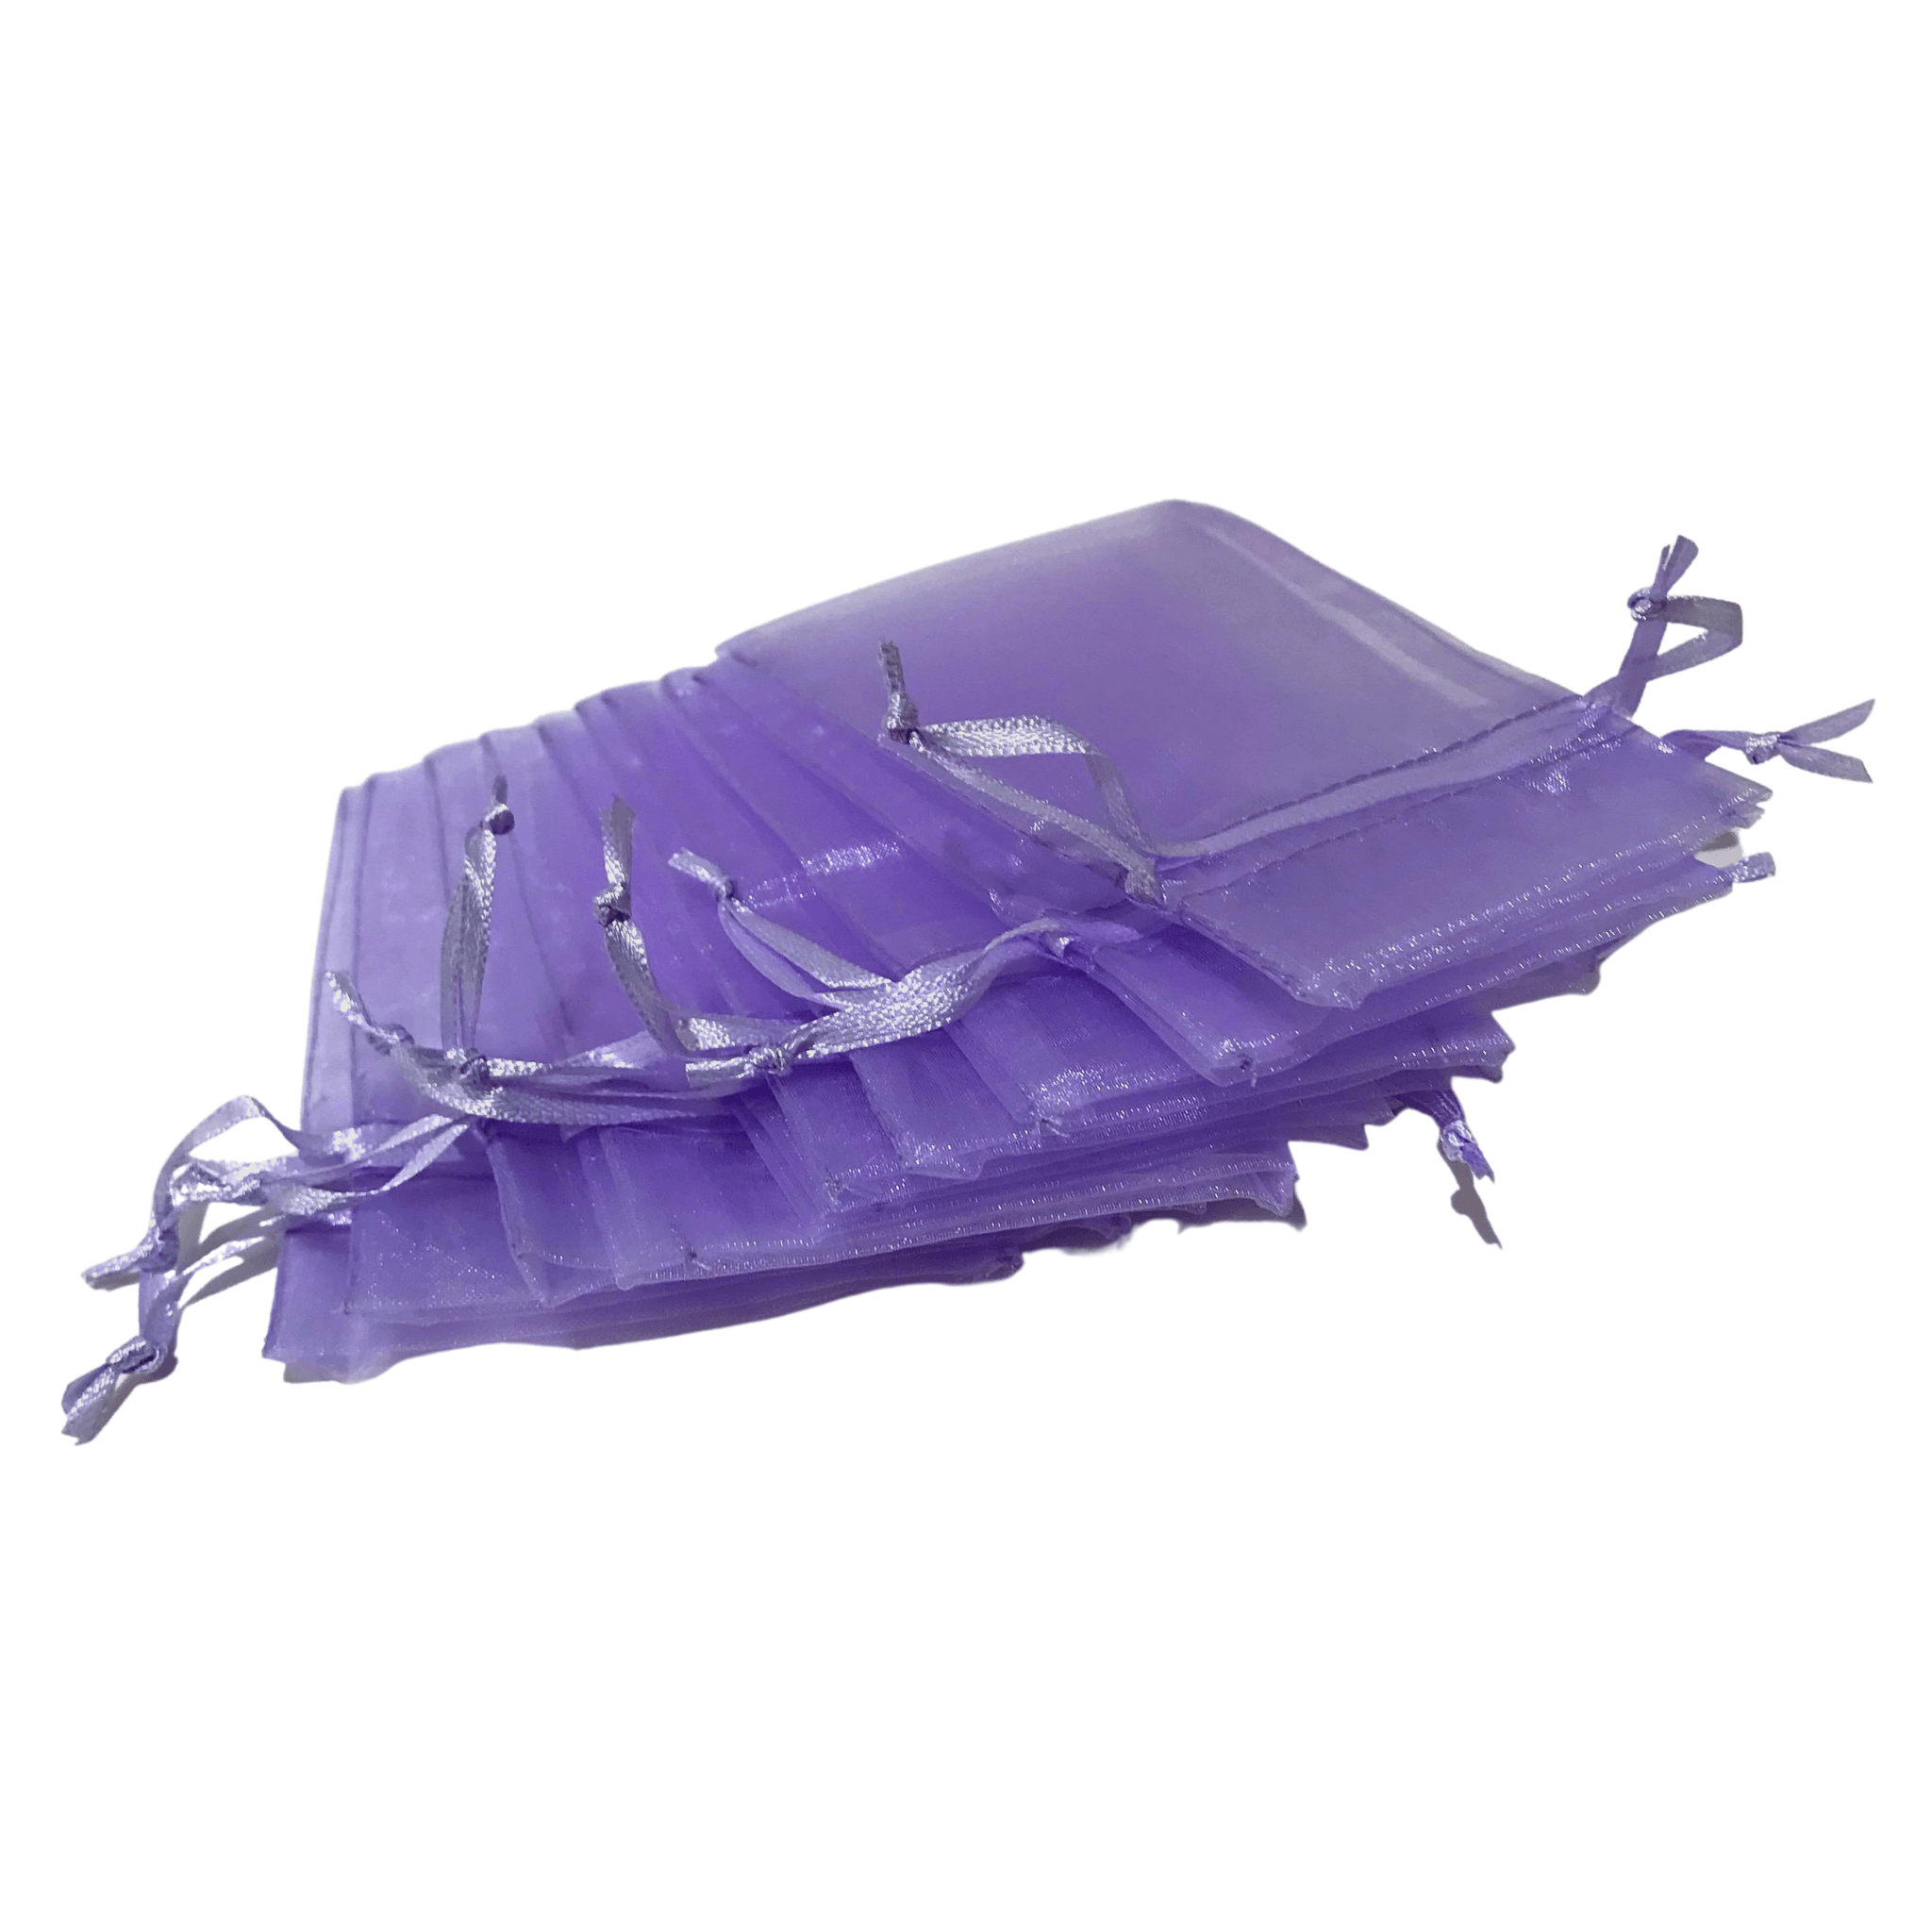 Empty Sachet Bags - Set of 10 - Lavender By The Bay